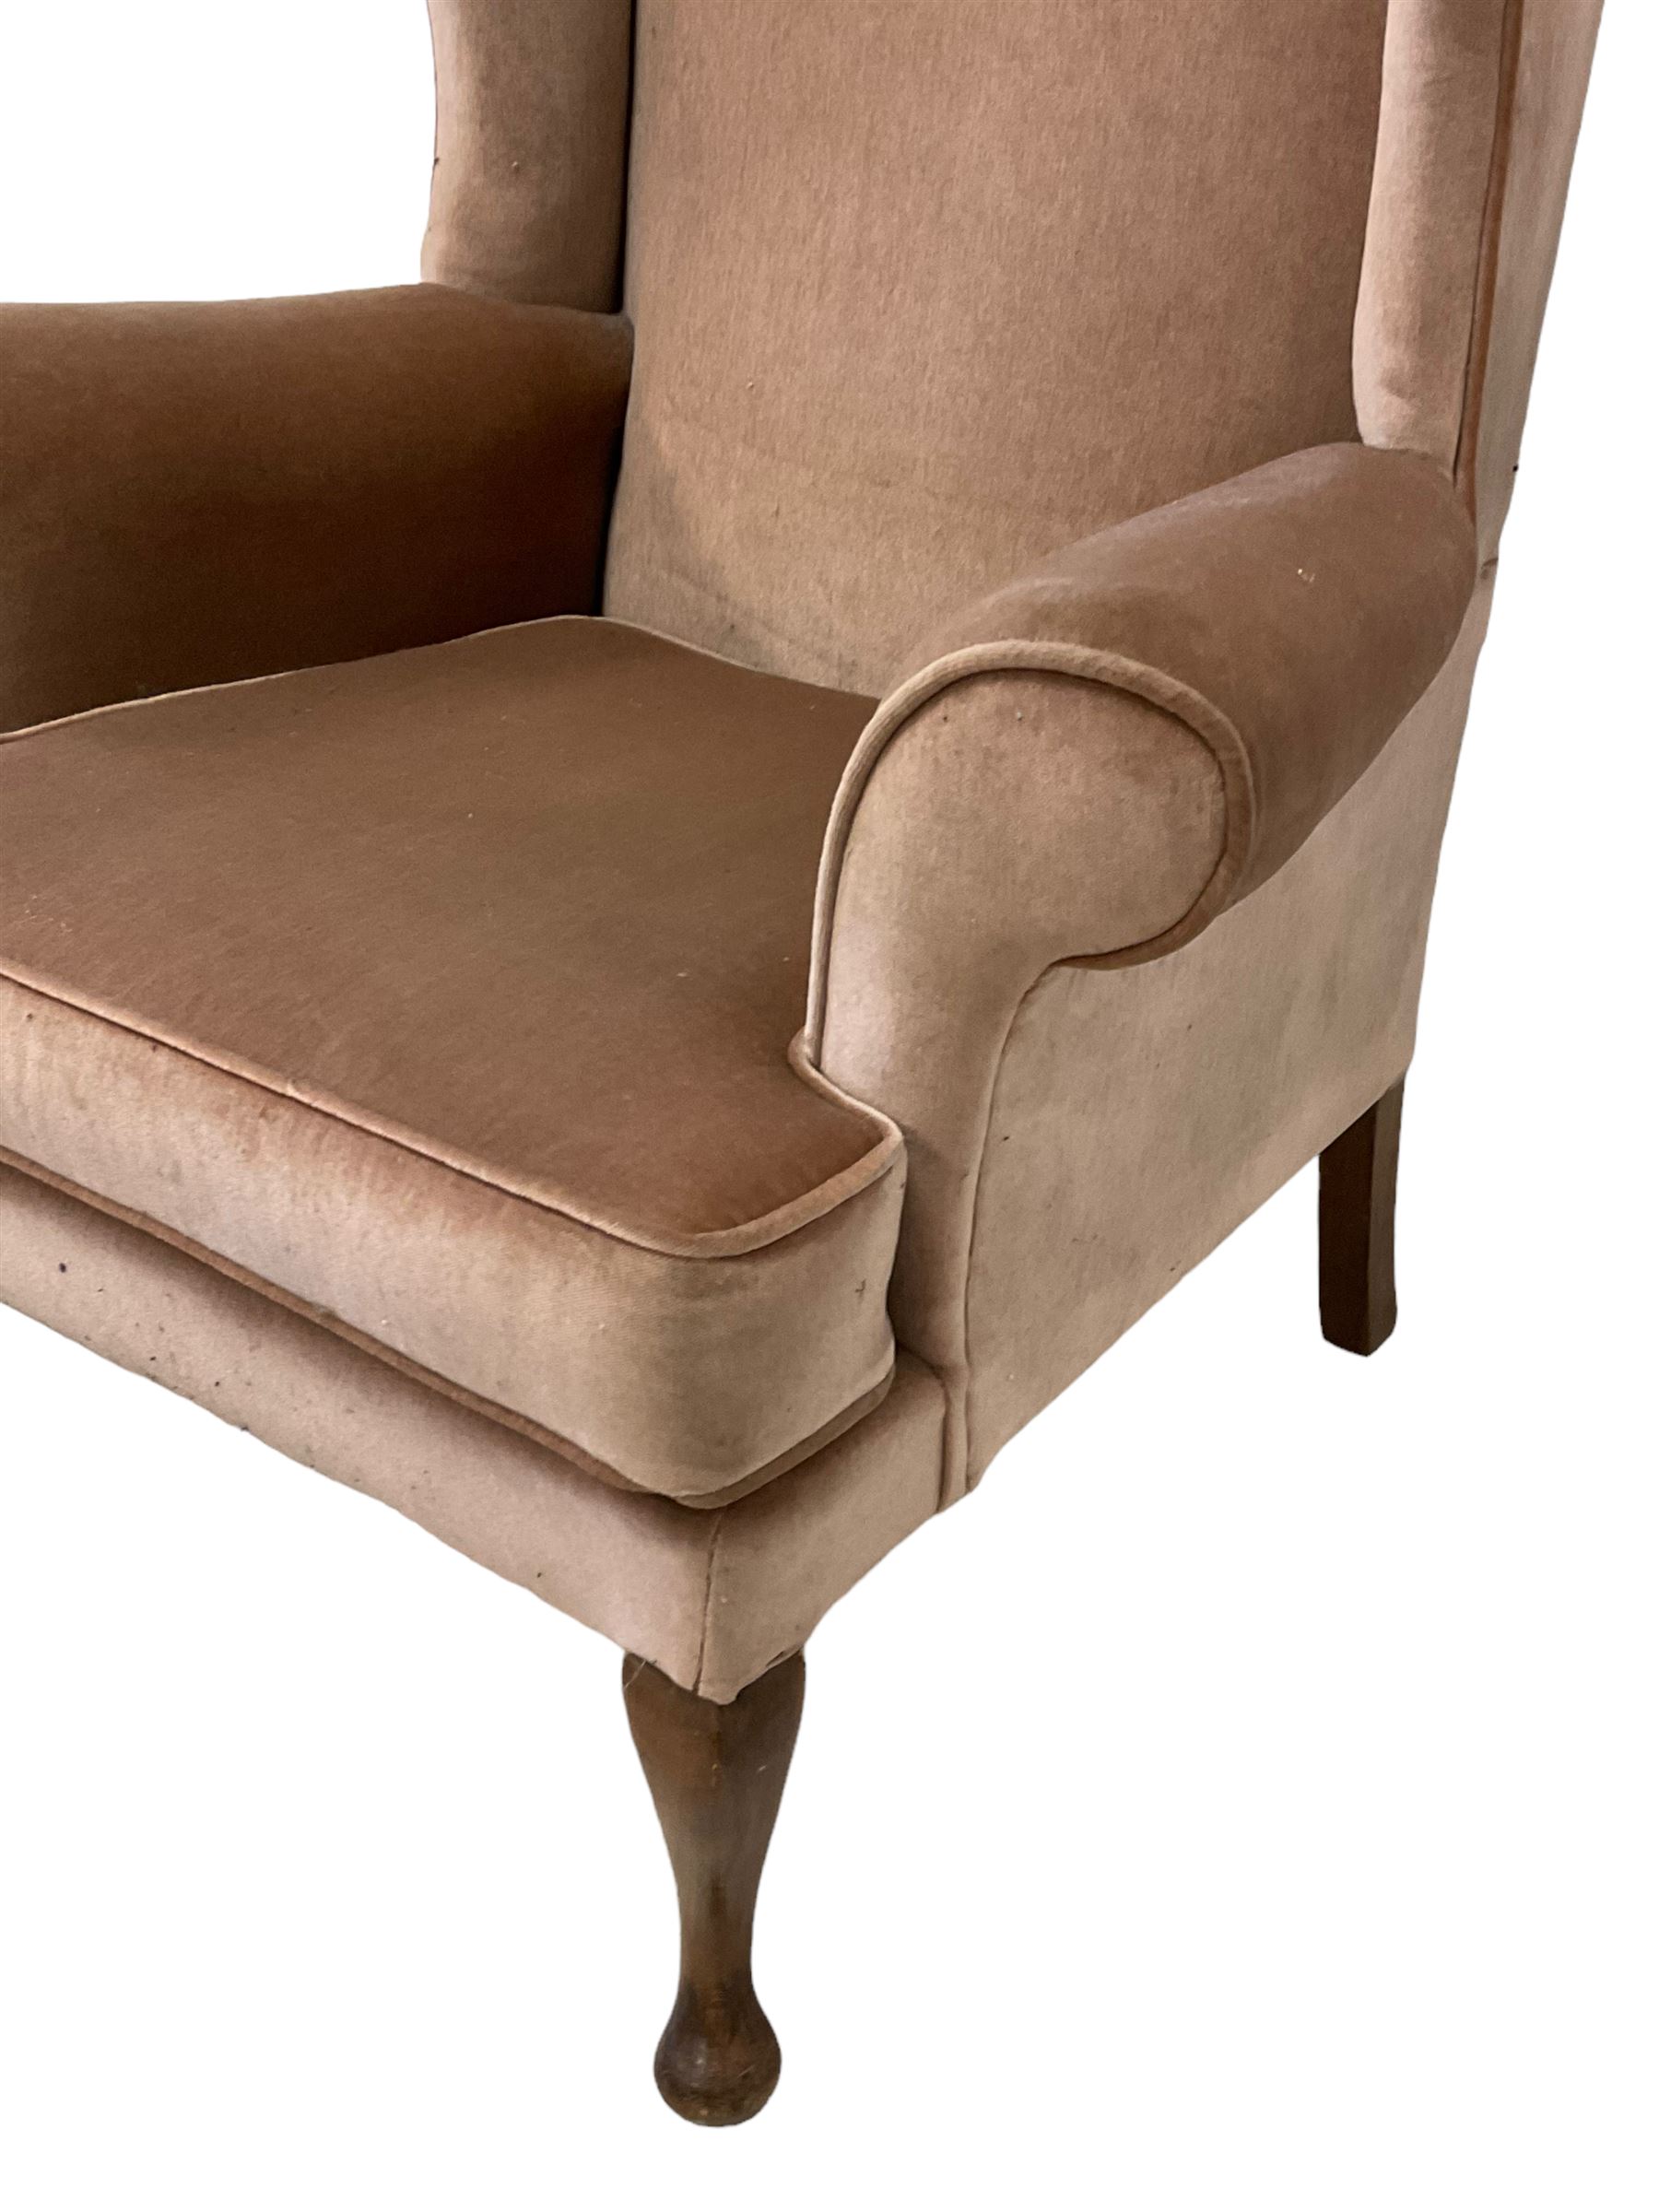 Parker Knoll - wingback armchair upholstered in light pink fabric - Image 4 of 4